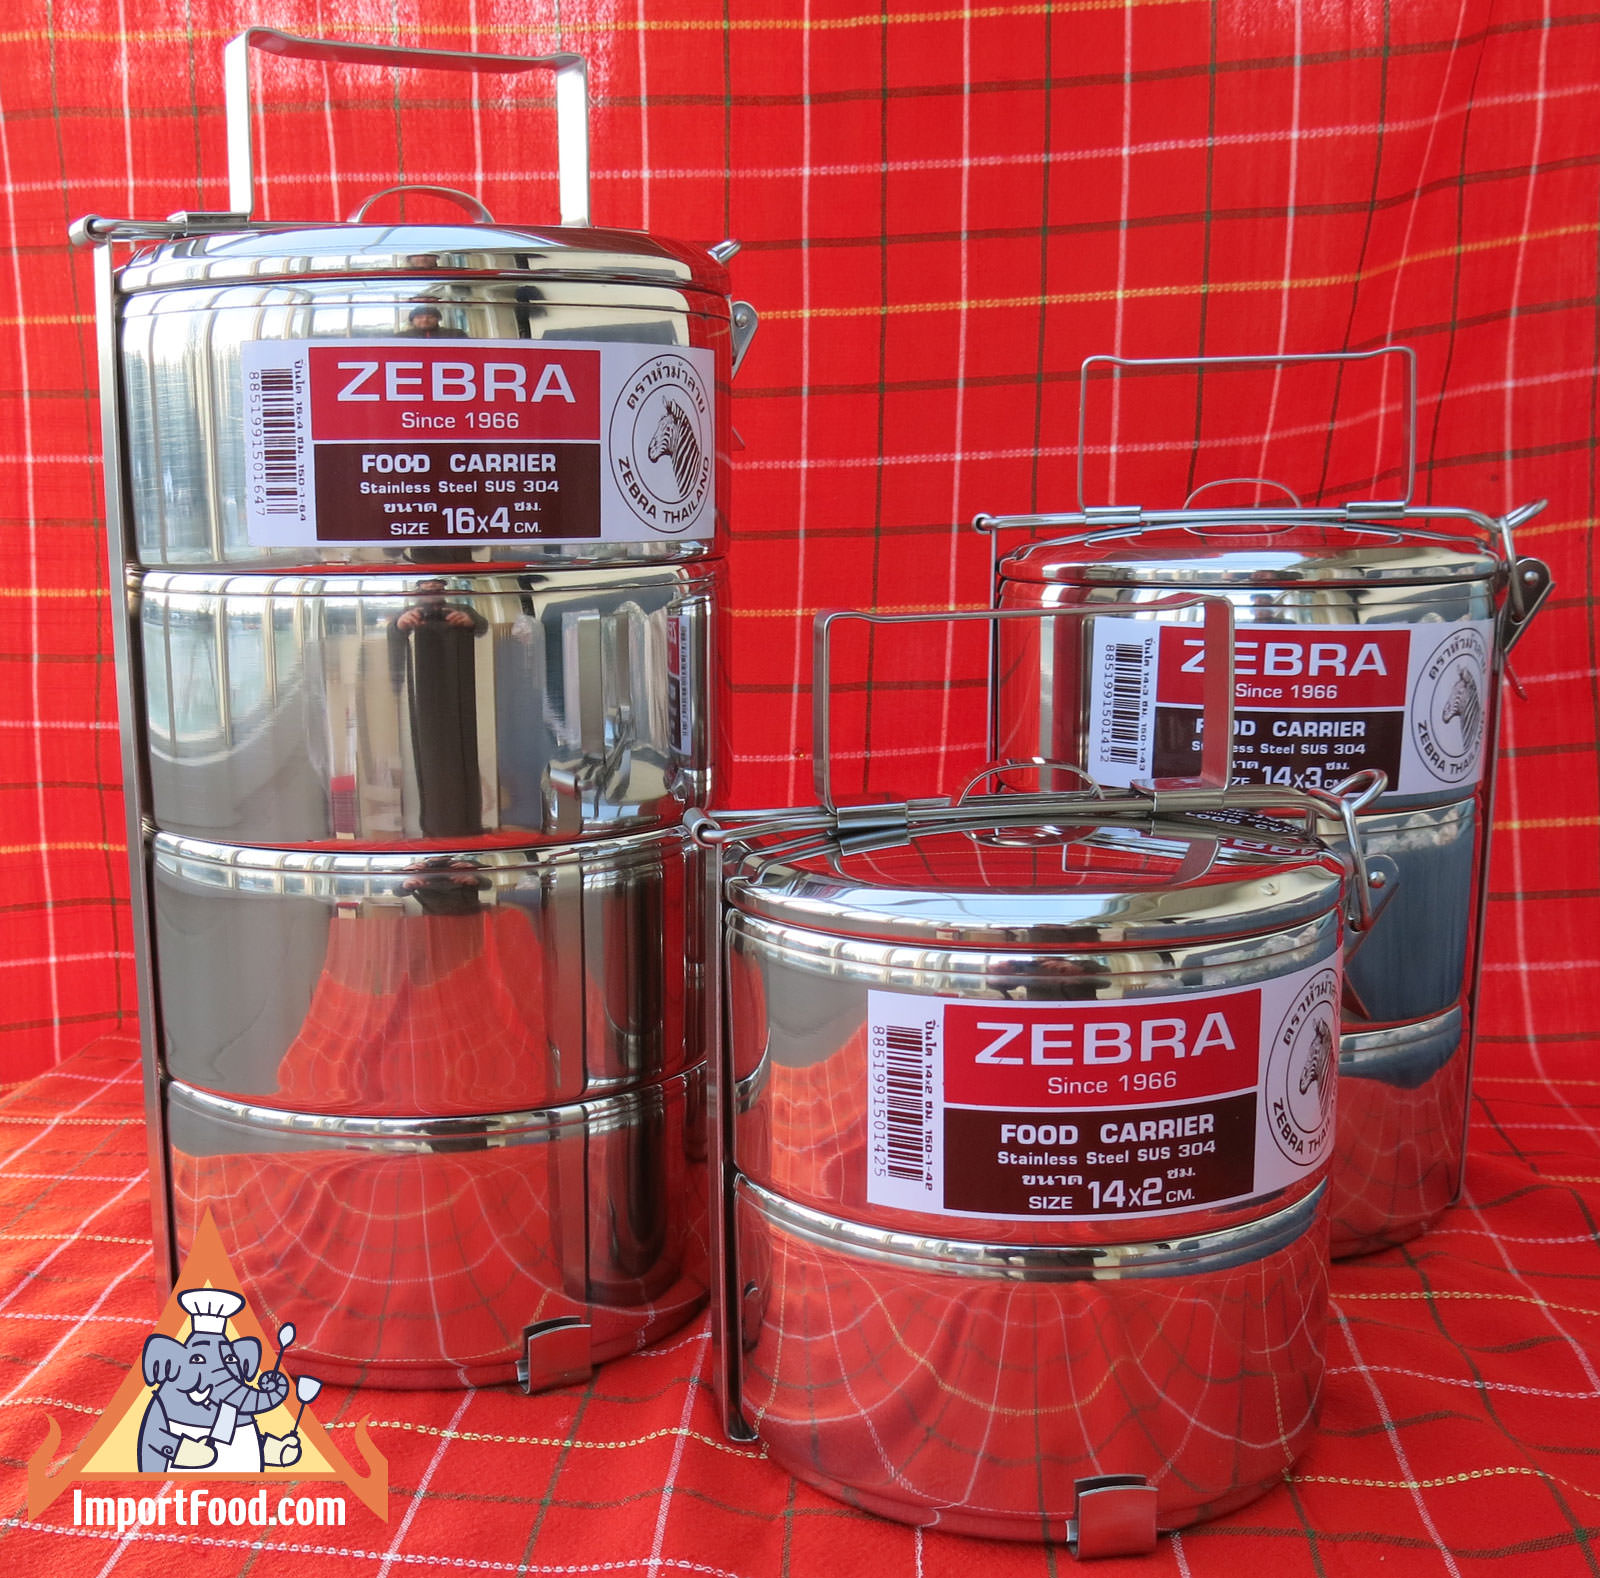 3 Tier Zebra Stainless Steel Food Carrier PAN SNAP LID COOKWARE CAMPING 3  pots